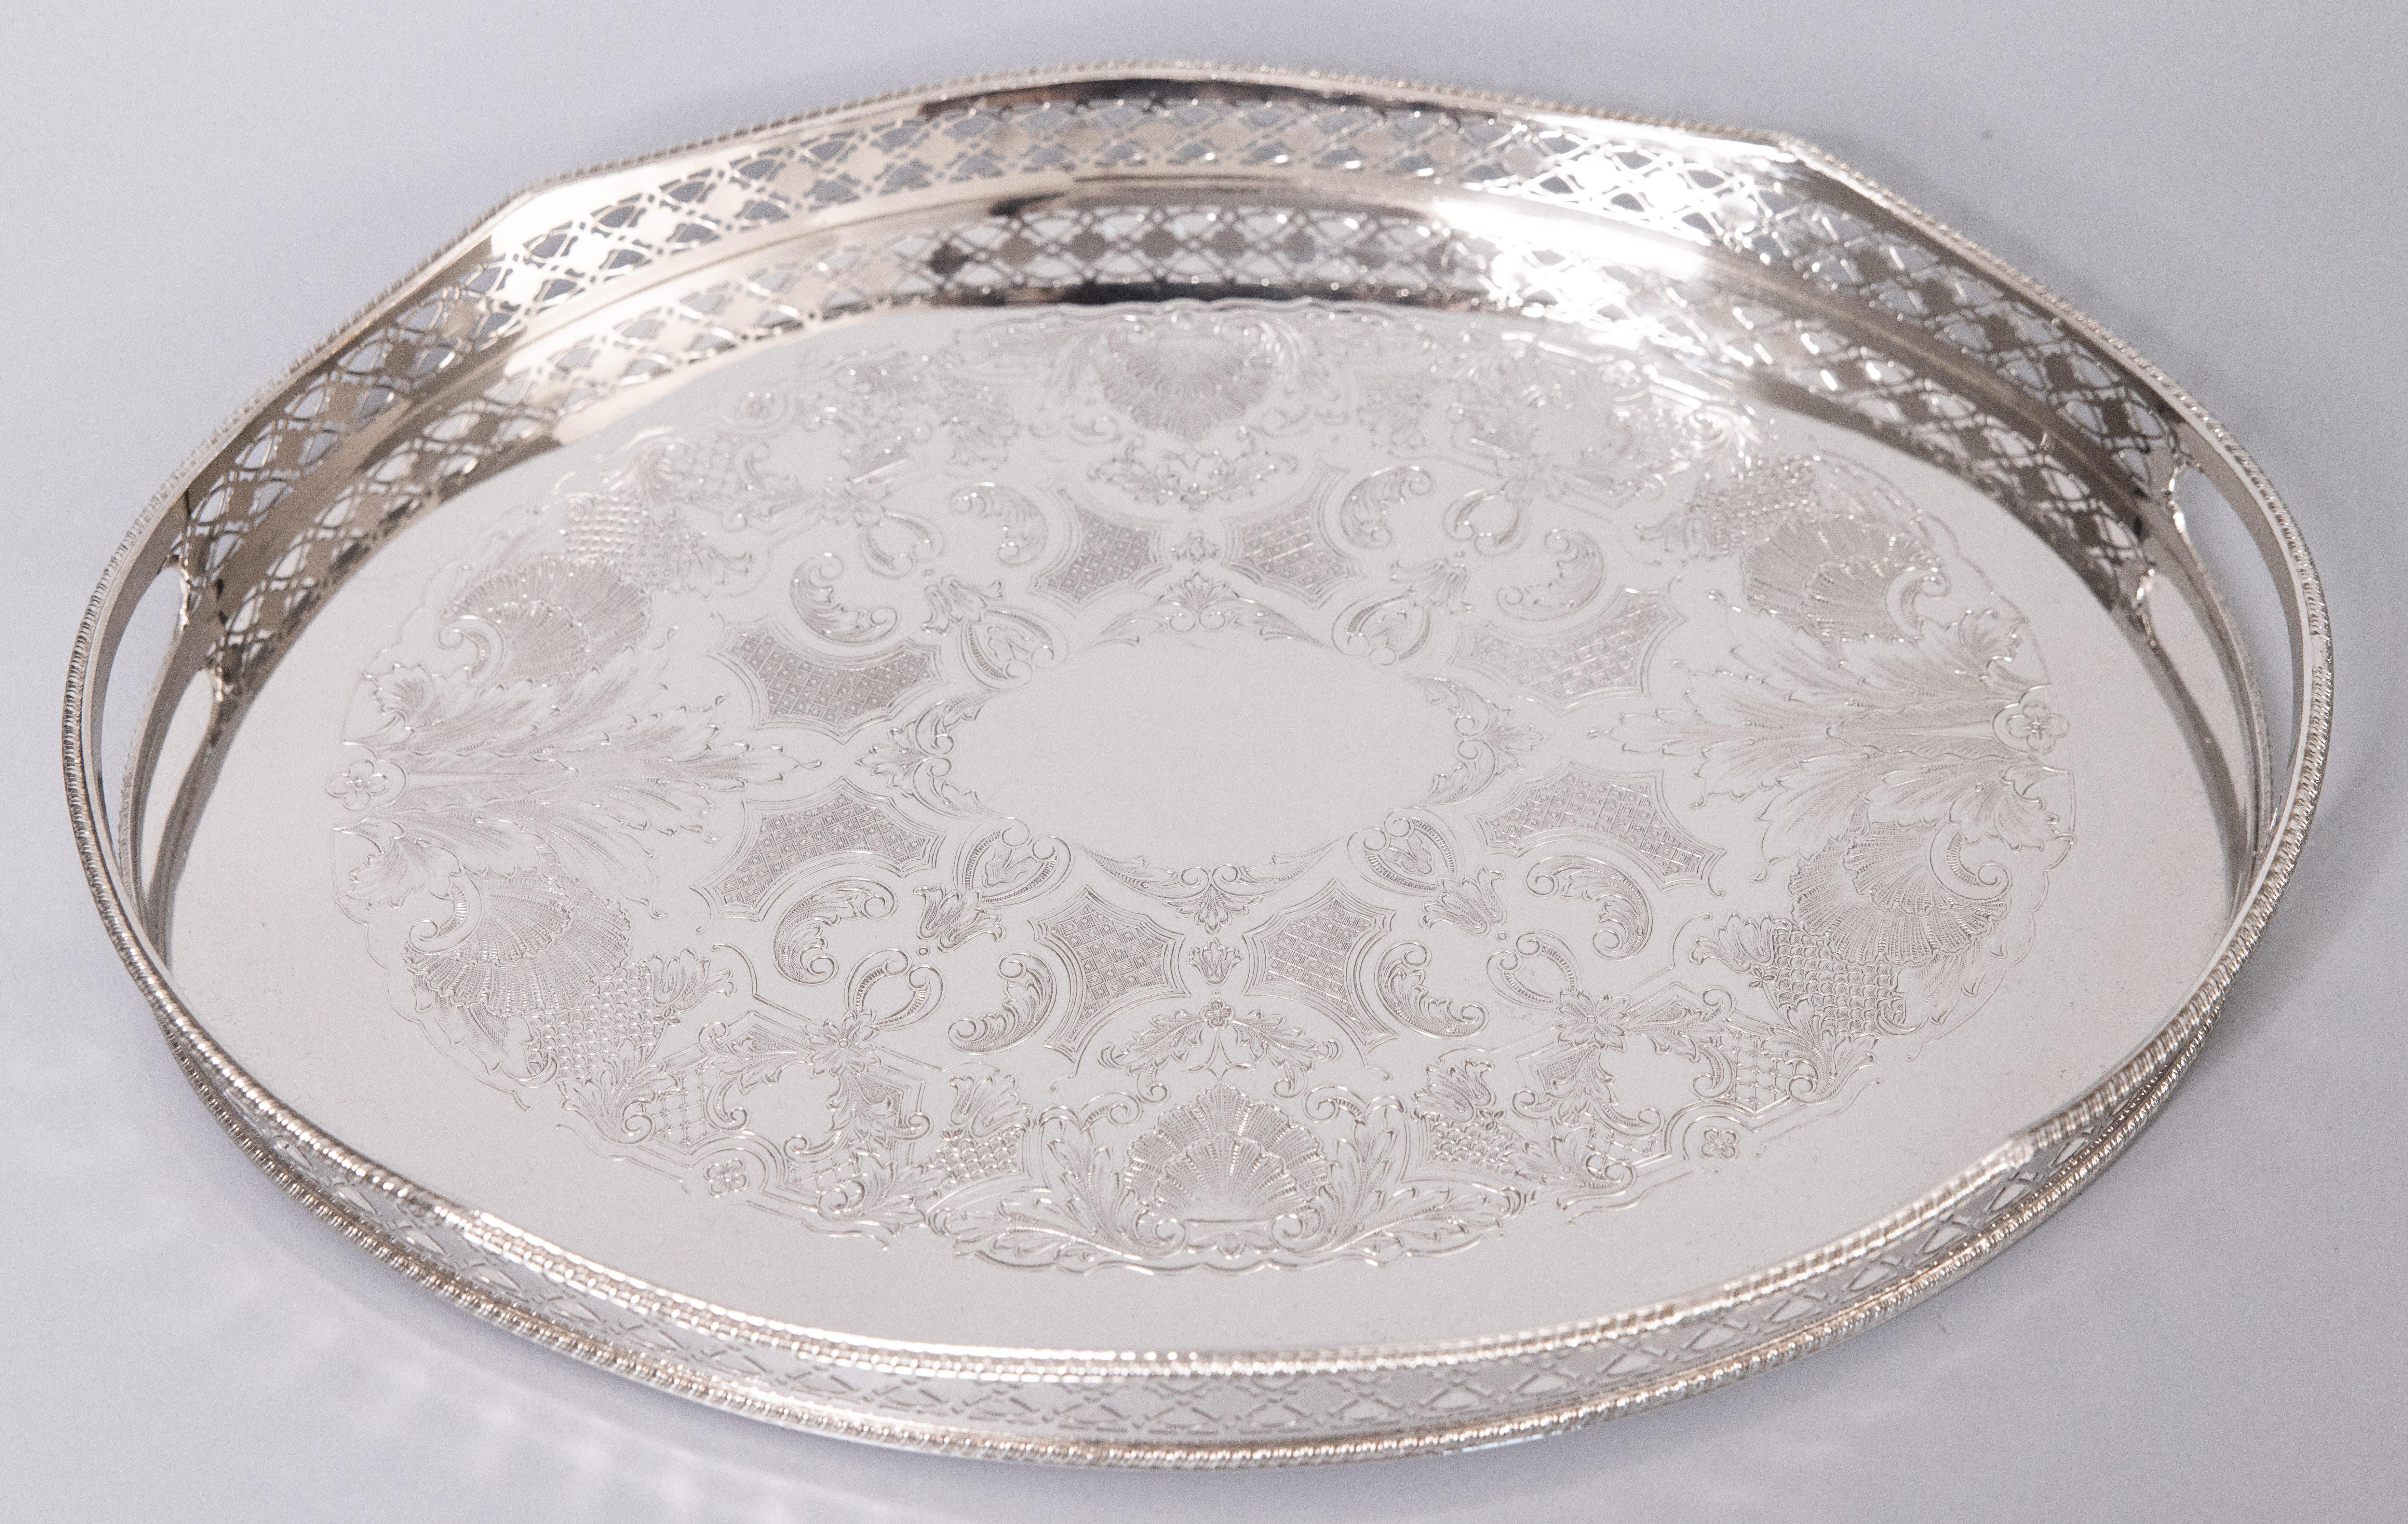 A fine antique English silverplate on copper footed gallery serving or barware drinks tray with handles. Marked 